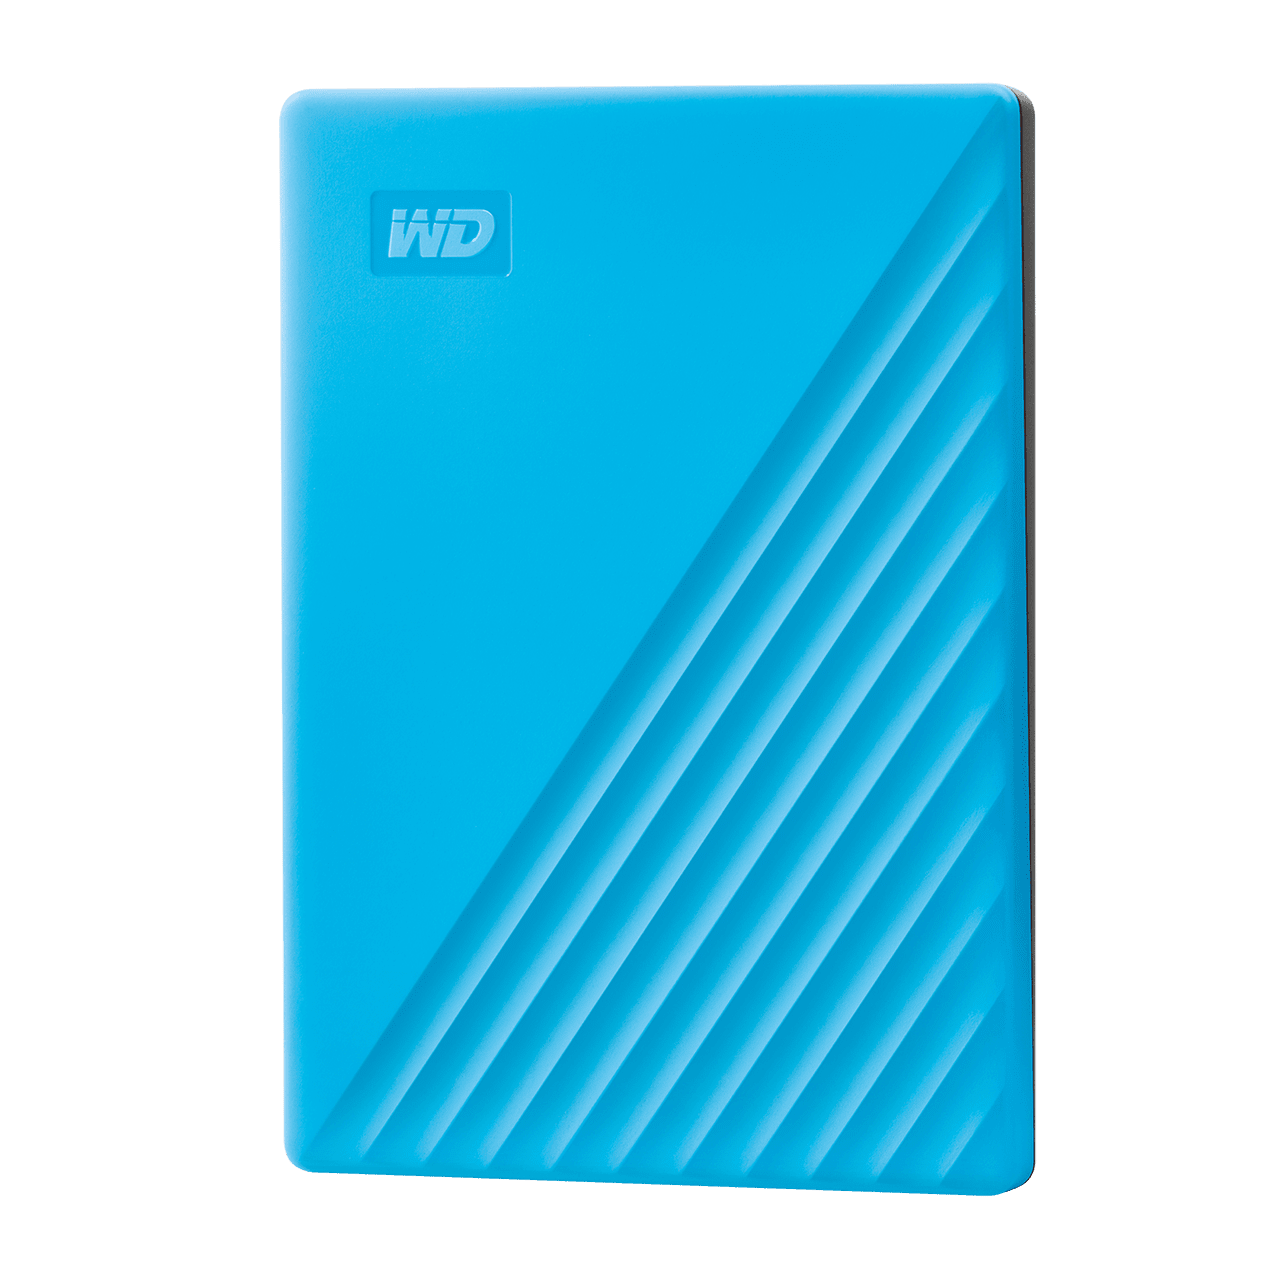 WD Western Digital My Passport  5TB ( BLUE ) Slim Portable External Hard Disk USB 3.0 With WD Backup Software & Password Protection